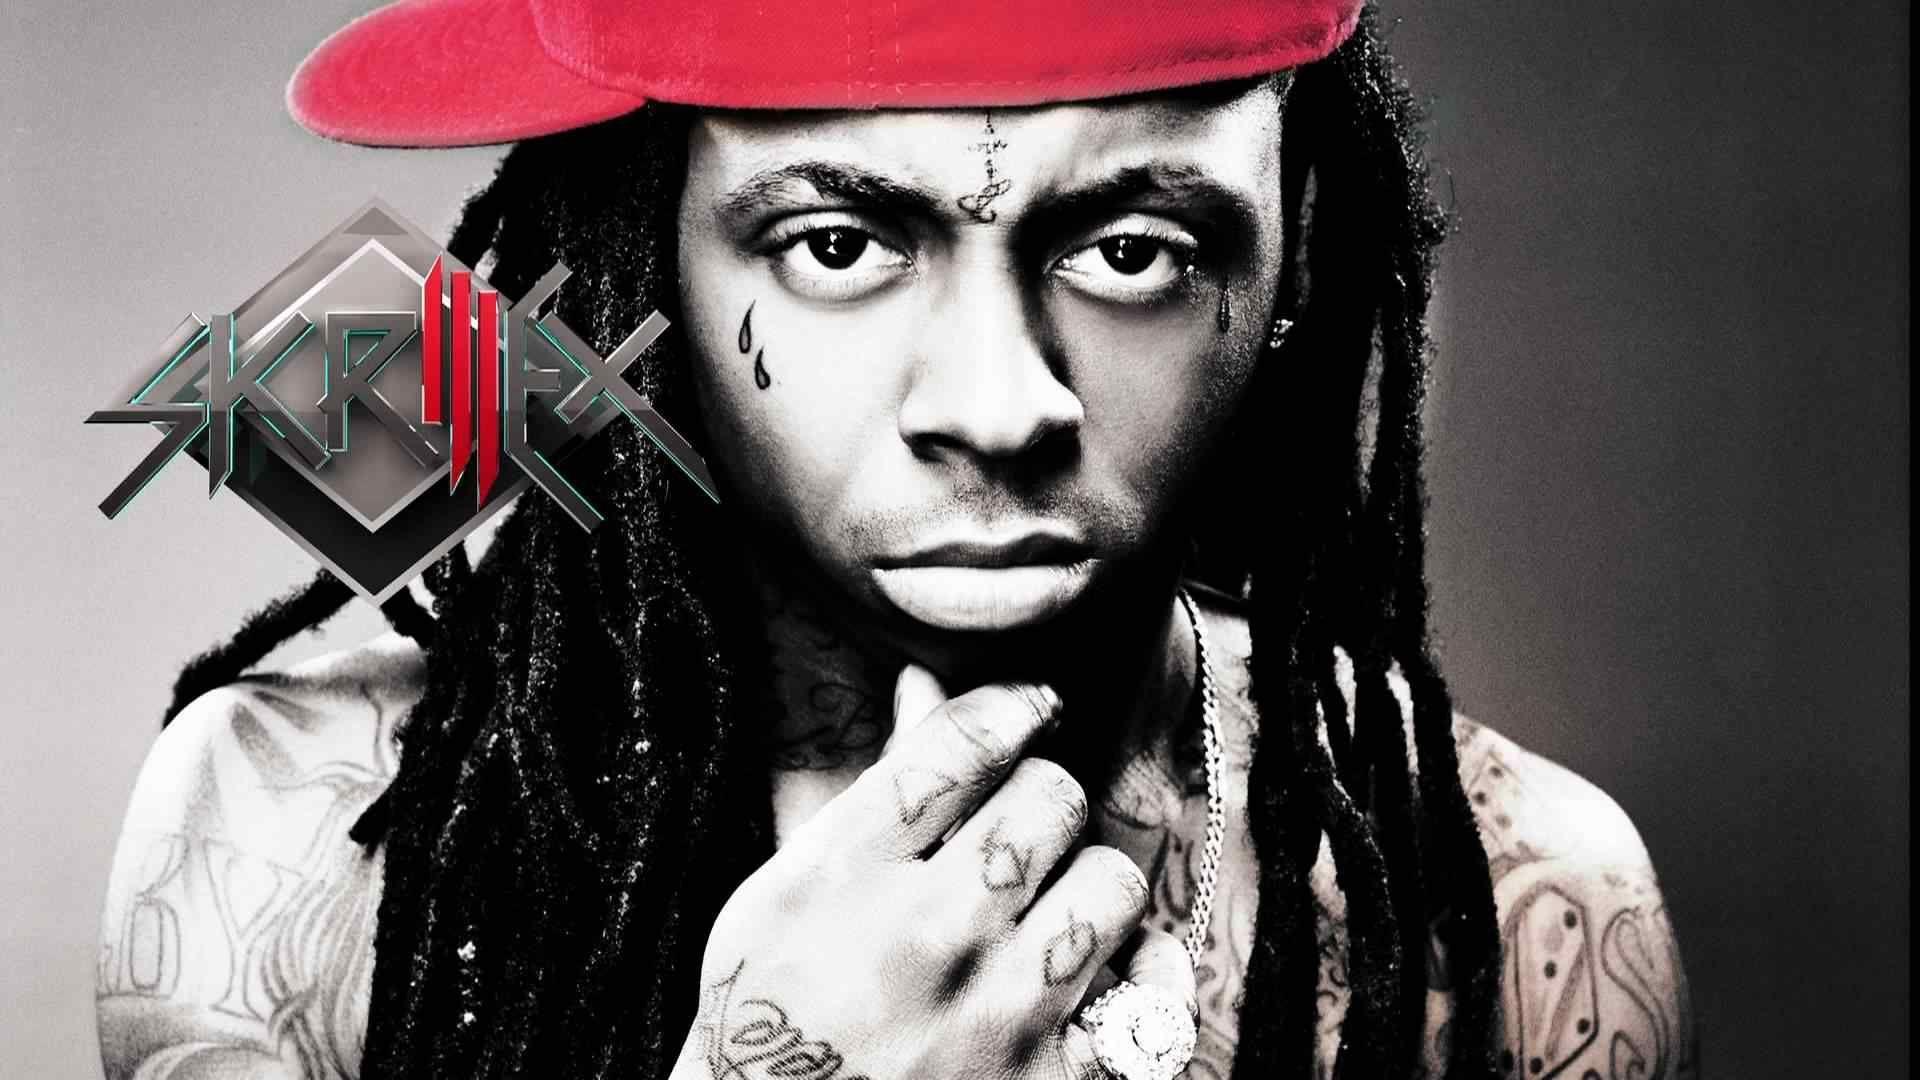 Lil Wayne Wallpapers For Iphone Wallpaper Cave